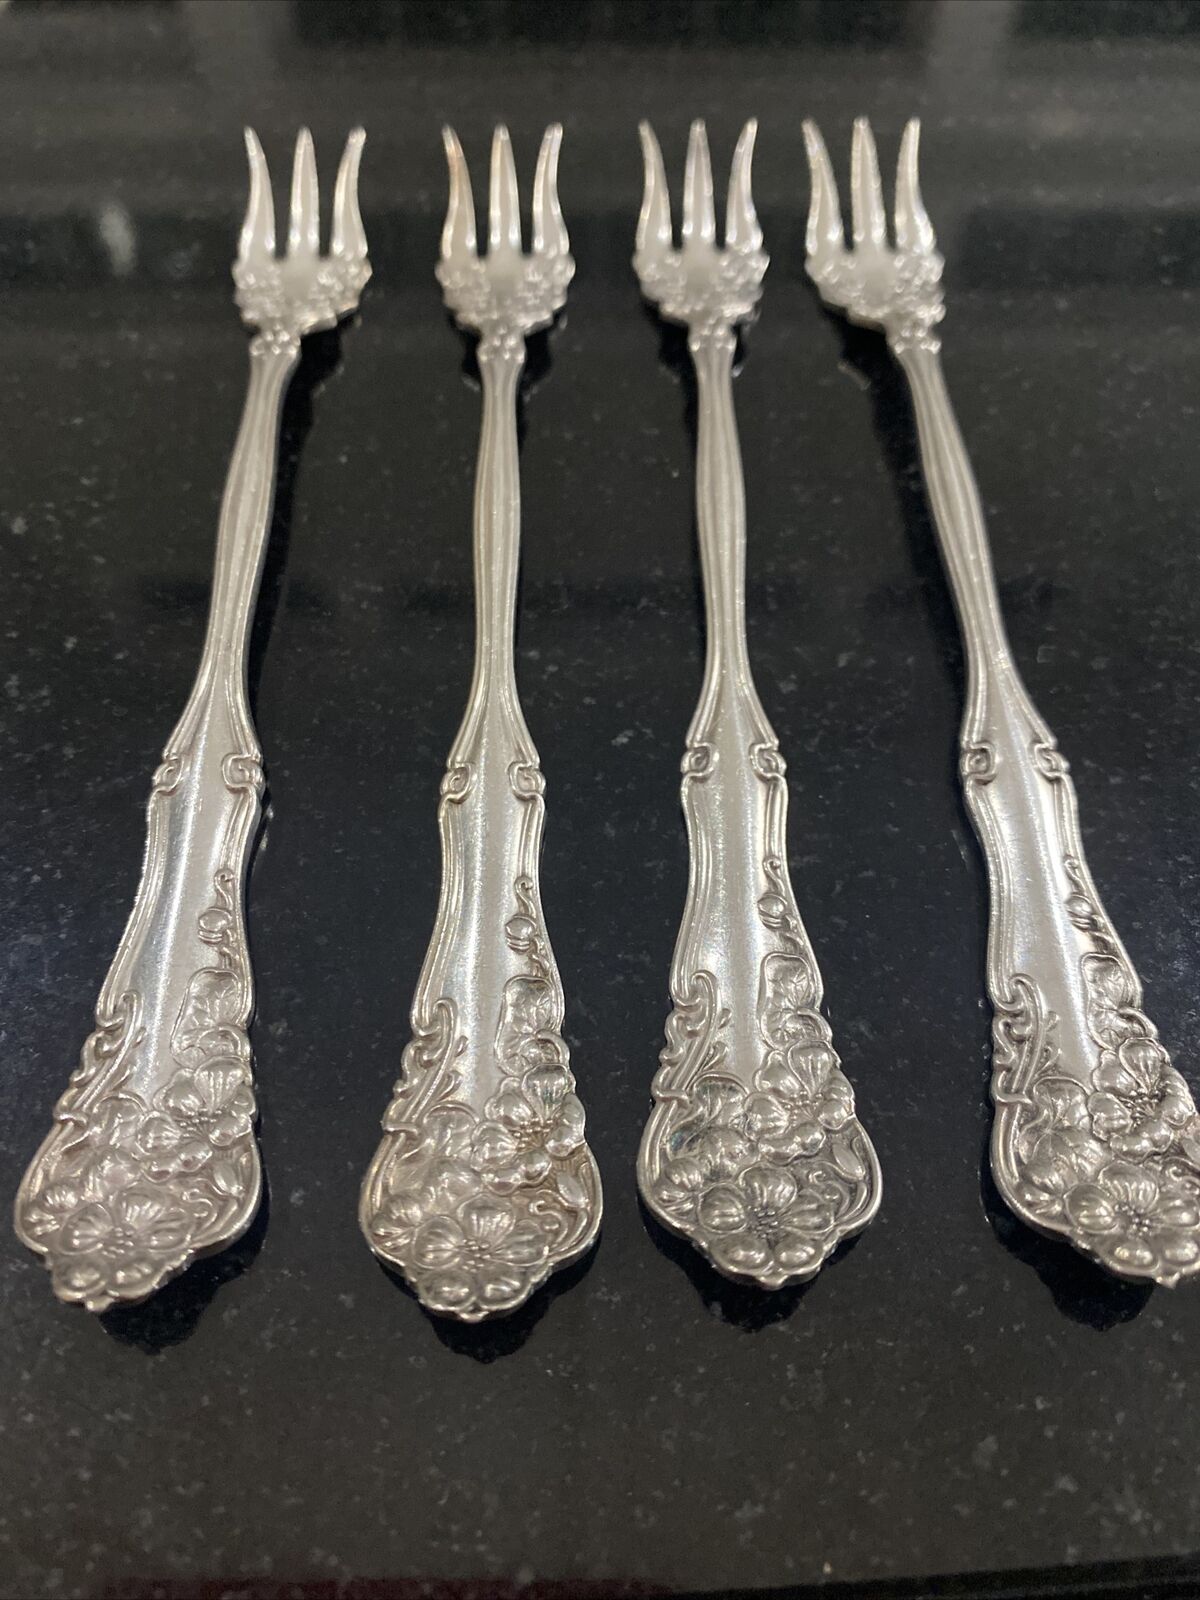 Set 4 Vintage 1847 Rogers Bros A1 Silverplate Seafood Oyster Forks.